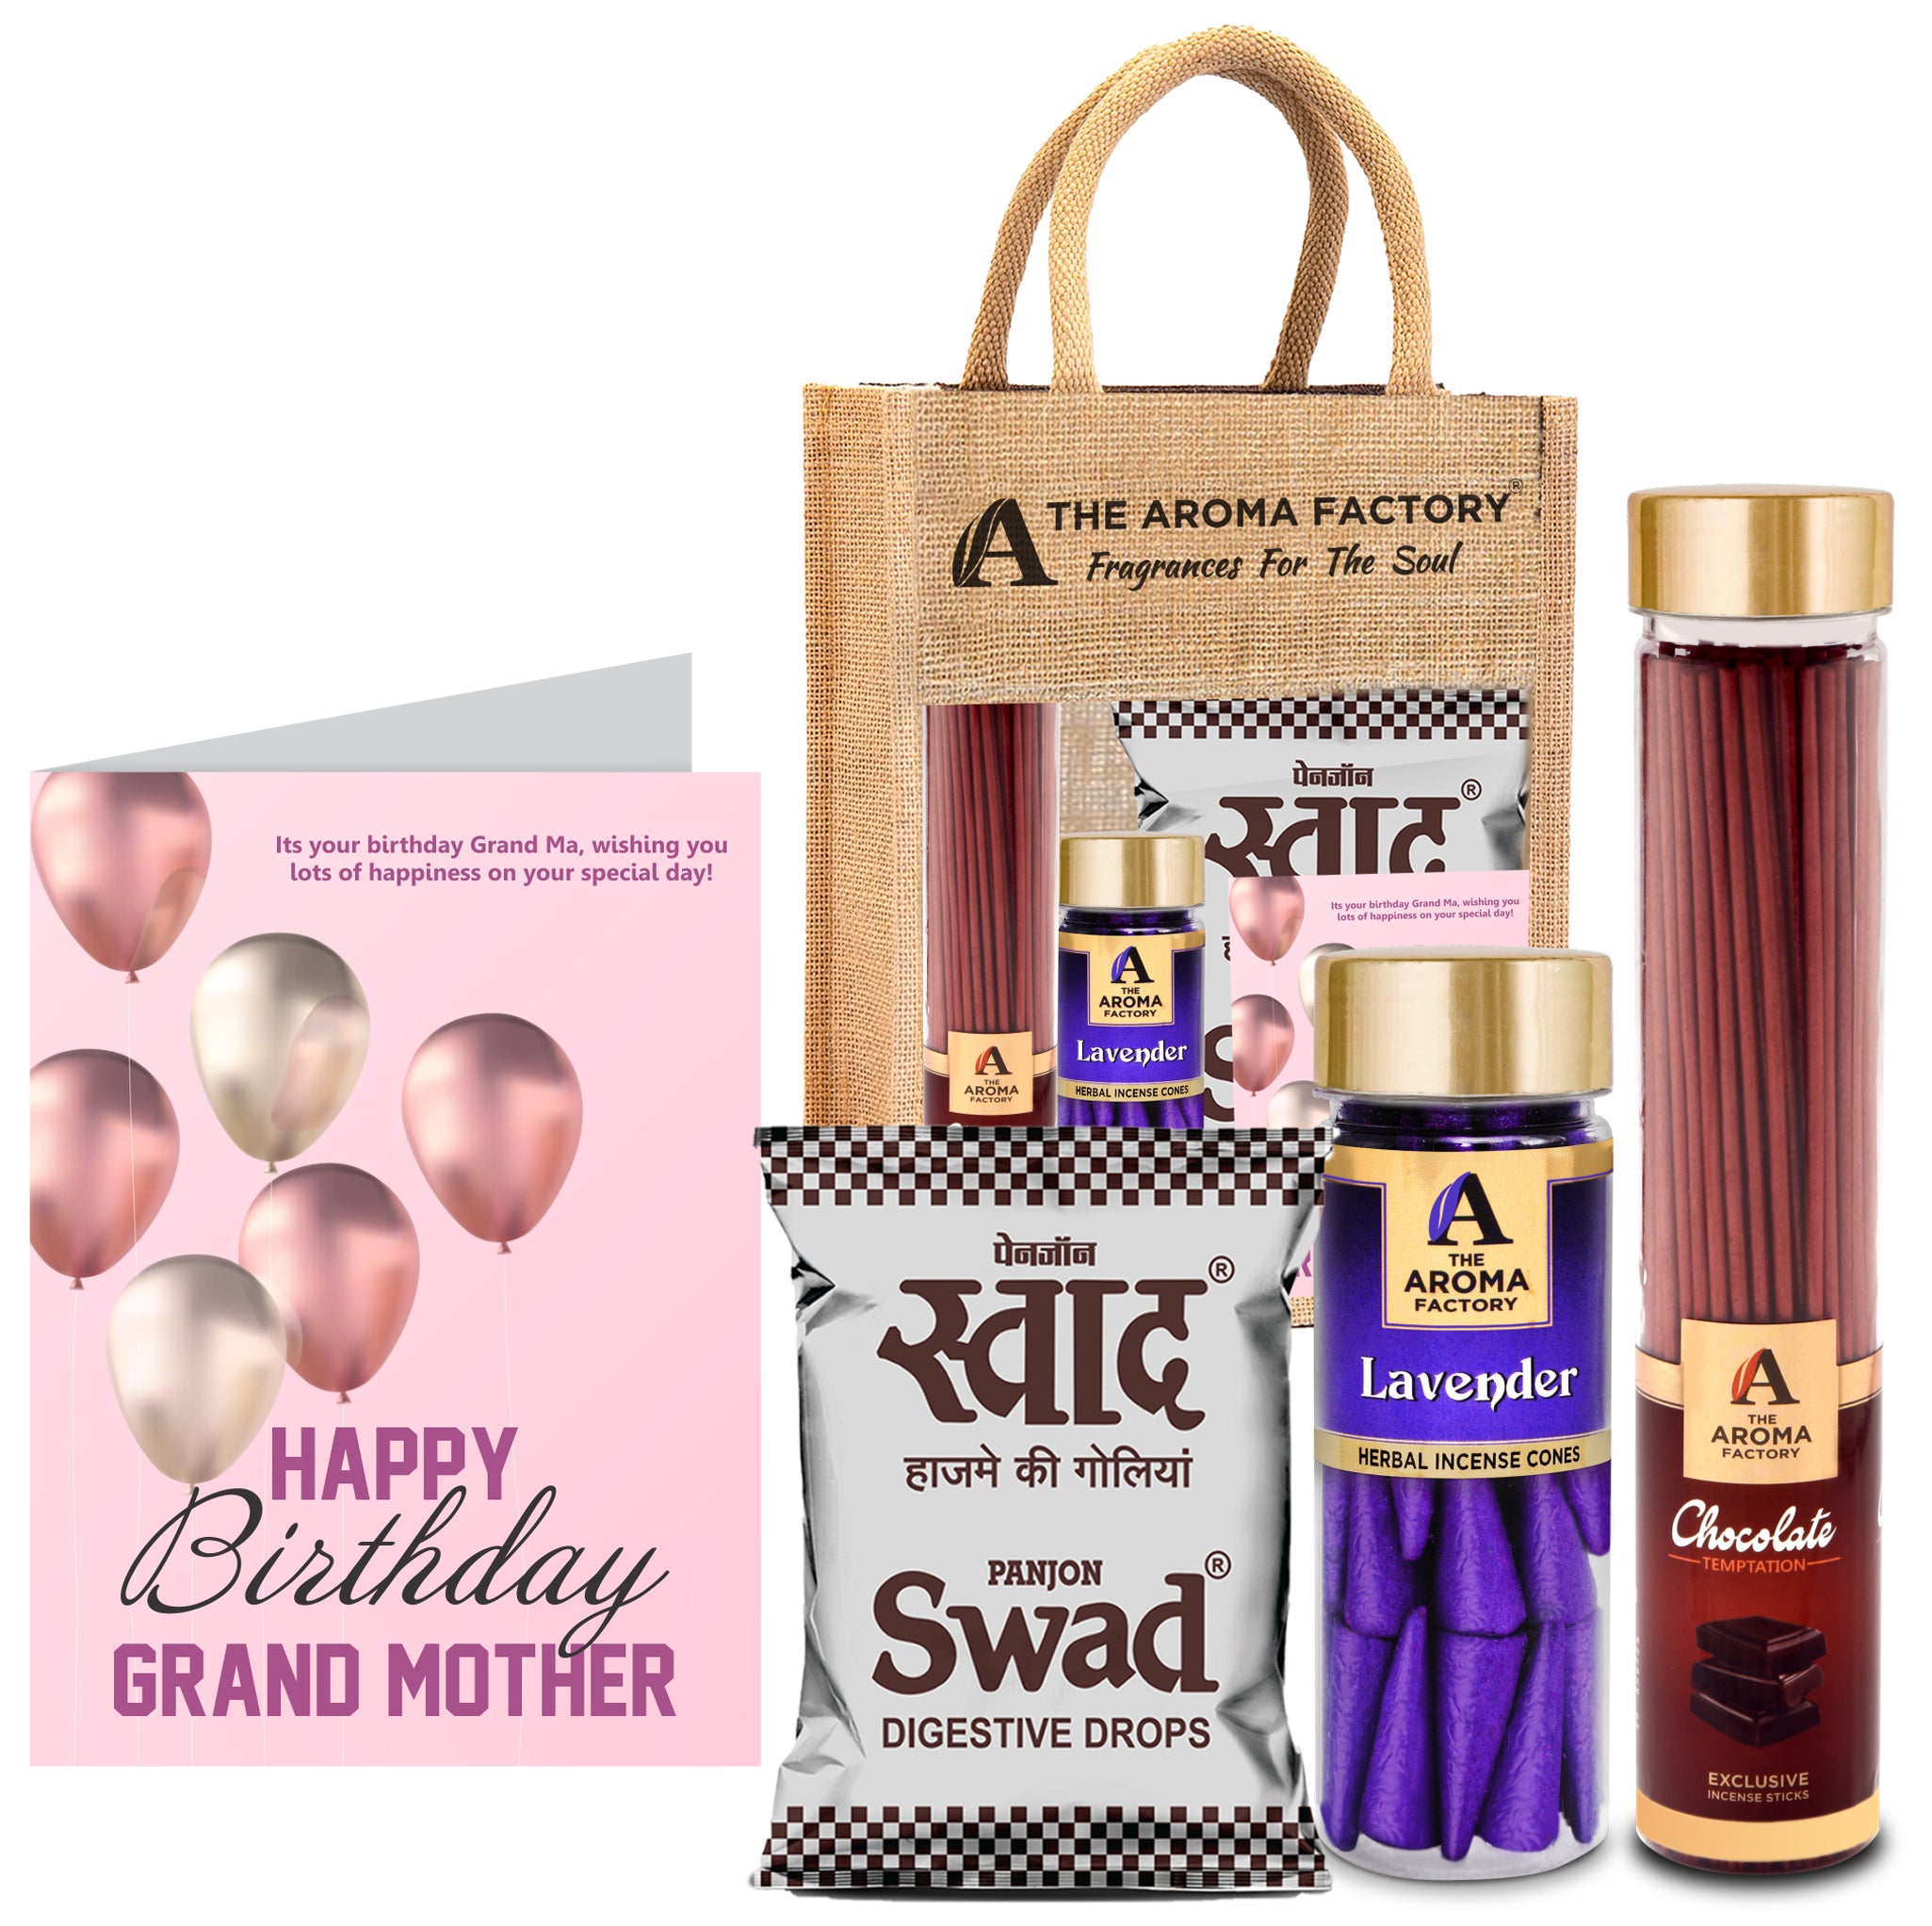 The Aroma Factory Happy Birthday Dadi Grand Mom Gift with Card (25 Swad Candy, Chocolate Agarbatti Bottle, Lavender Cone) in Jute Bag